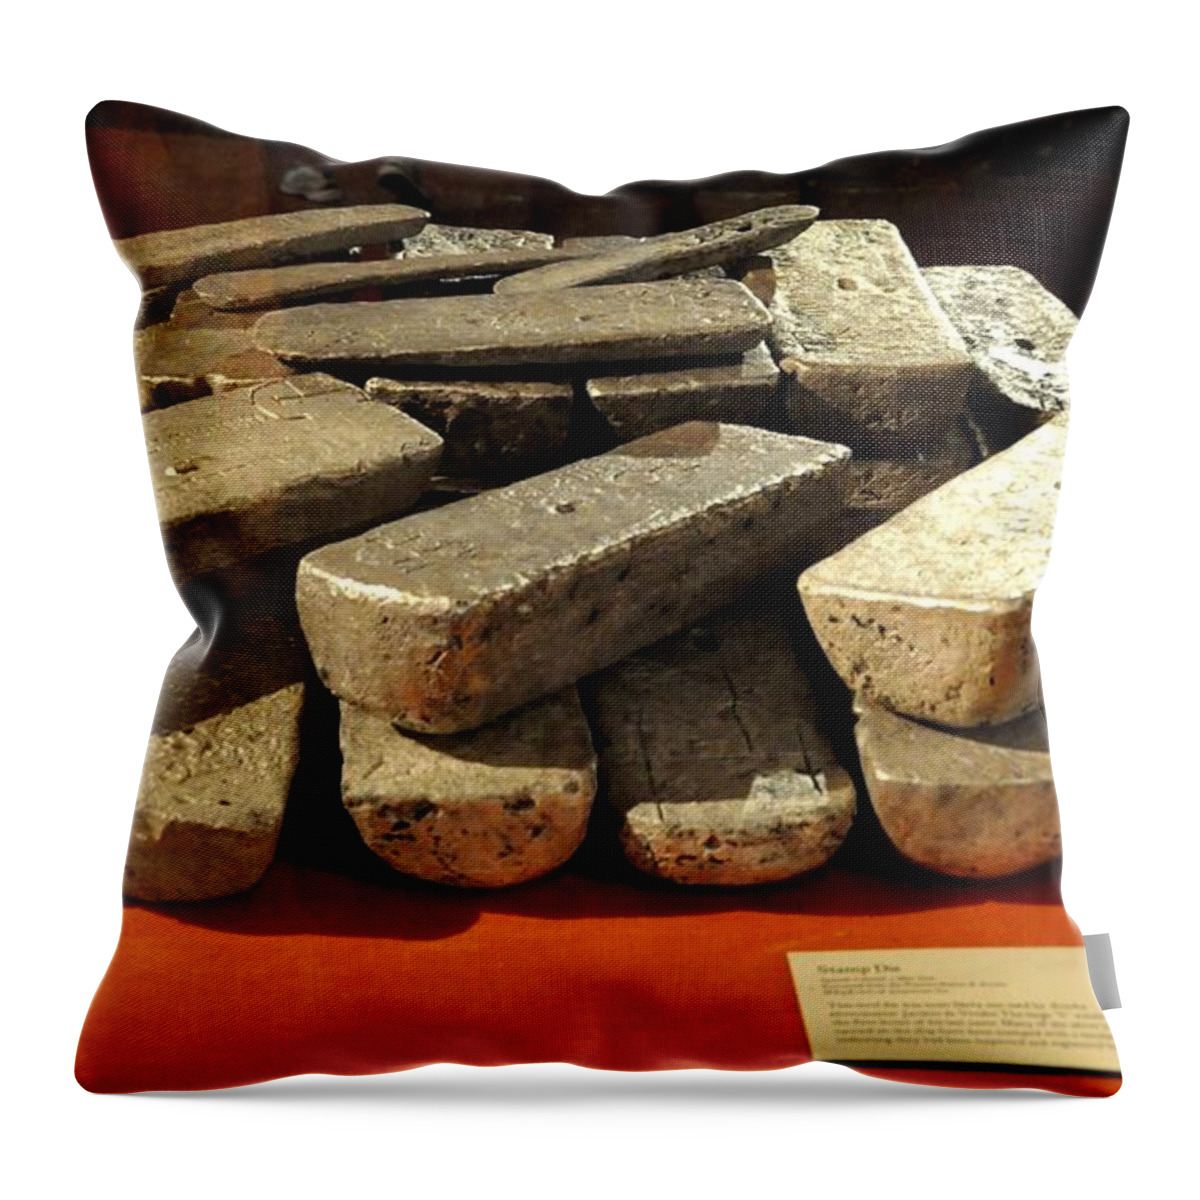 Silver Bars Throw Pillow featuring the photograph Silver Bars by John Black